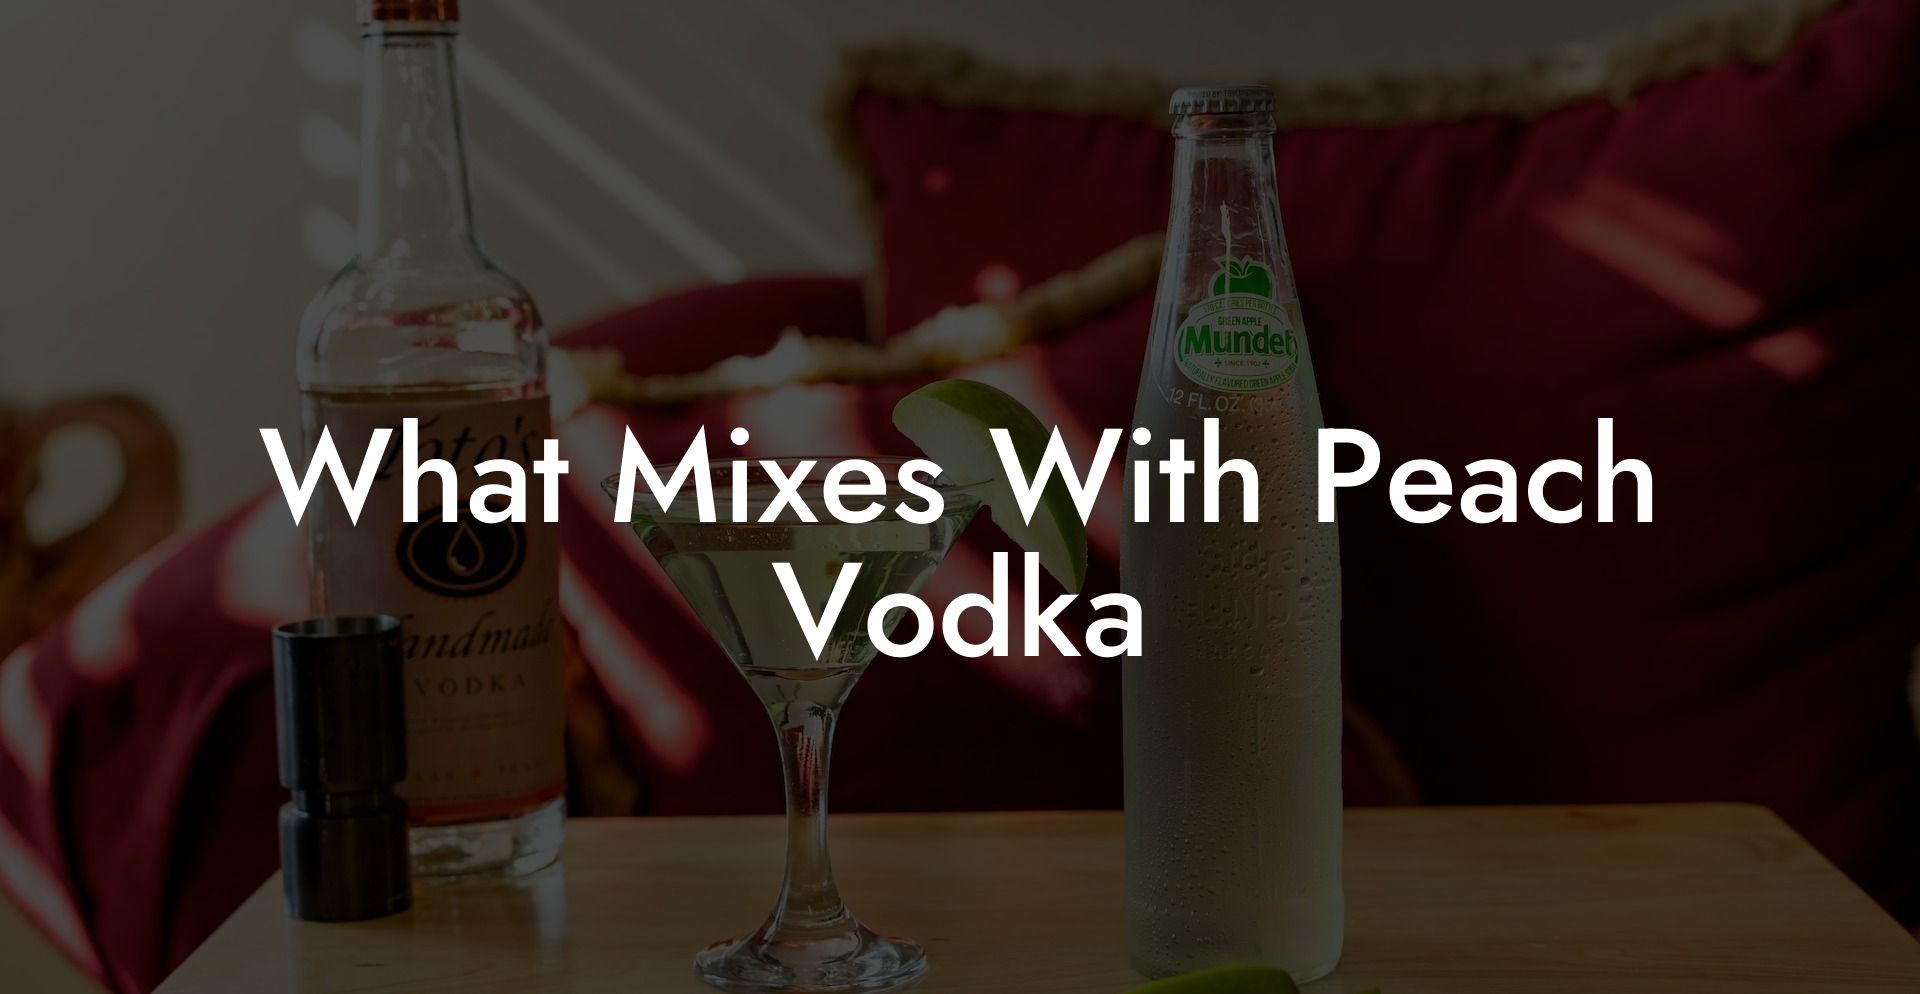 What Mixes With Peach Vodka